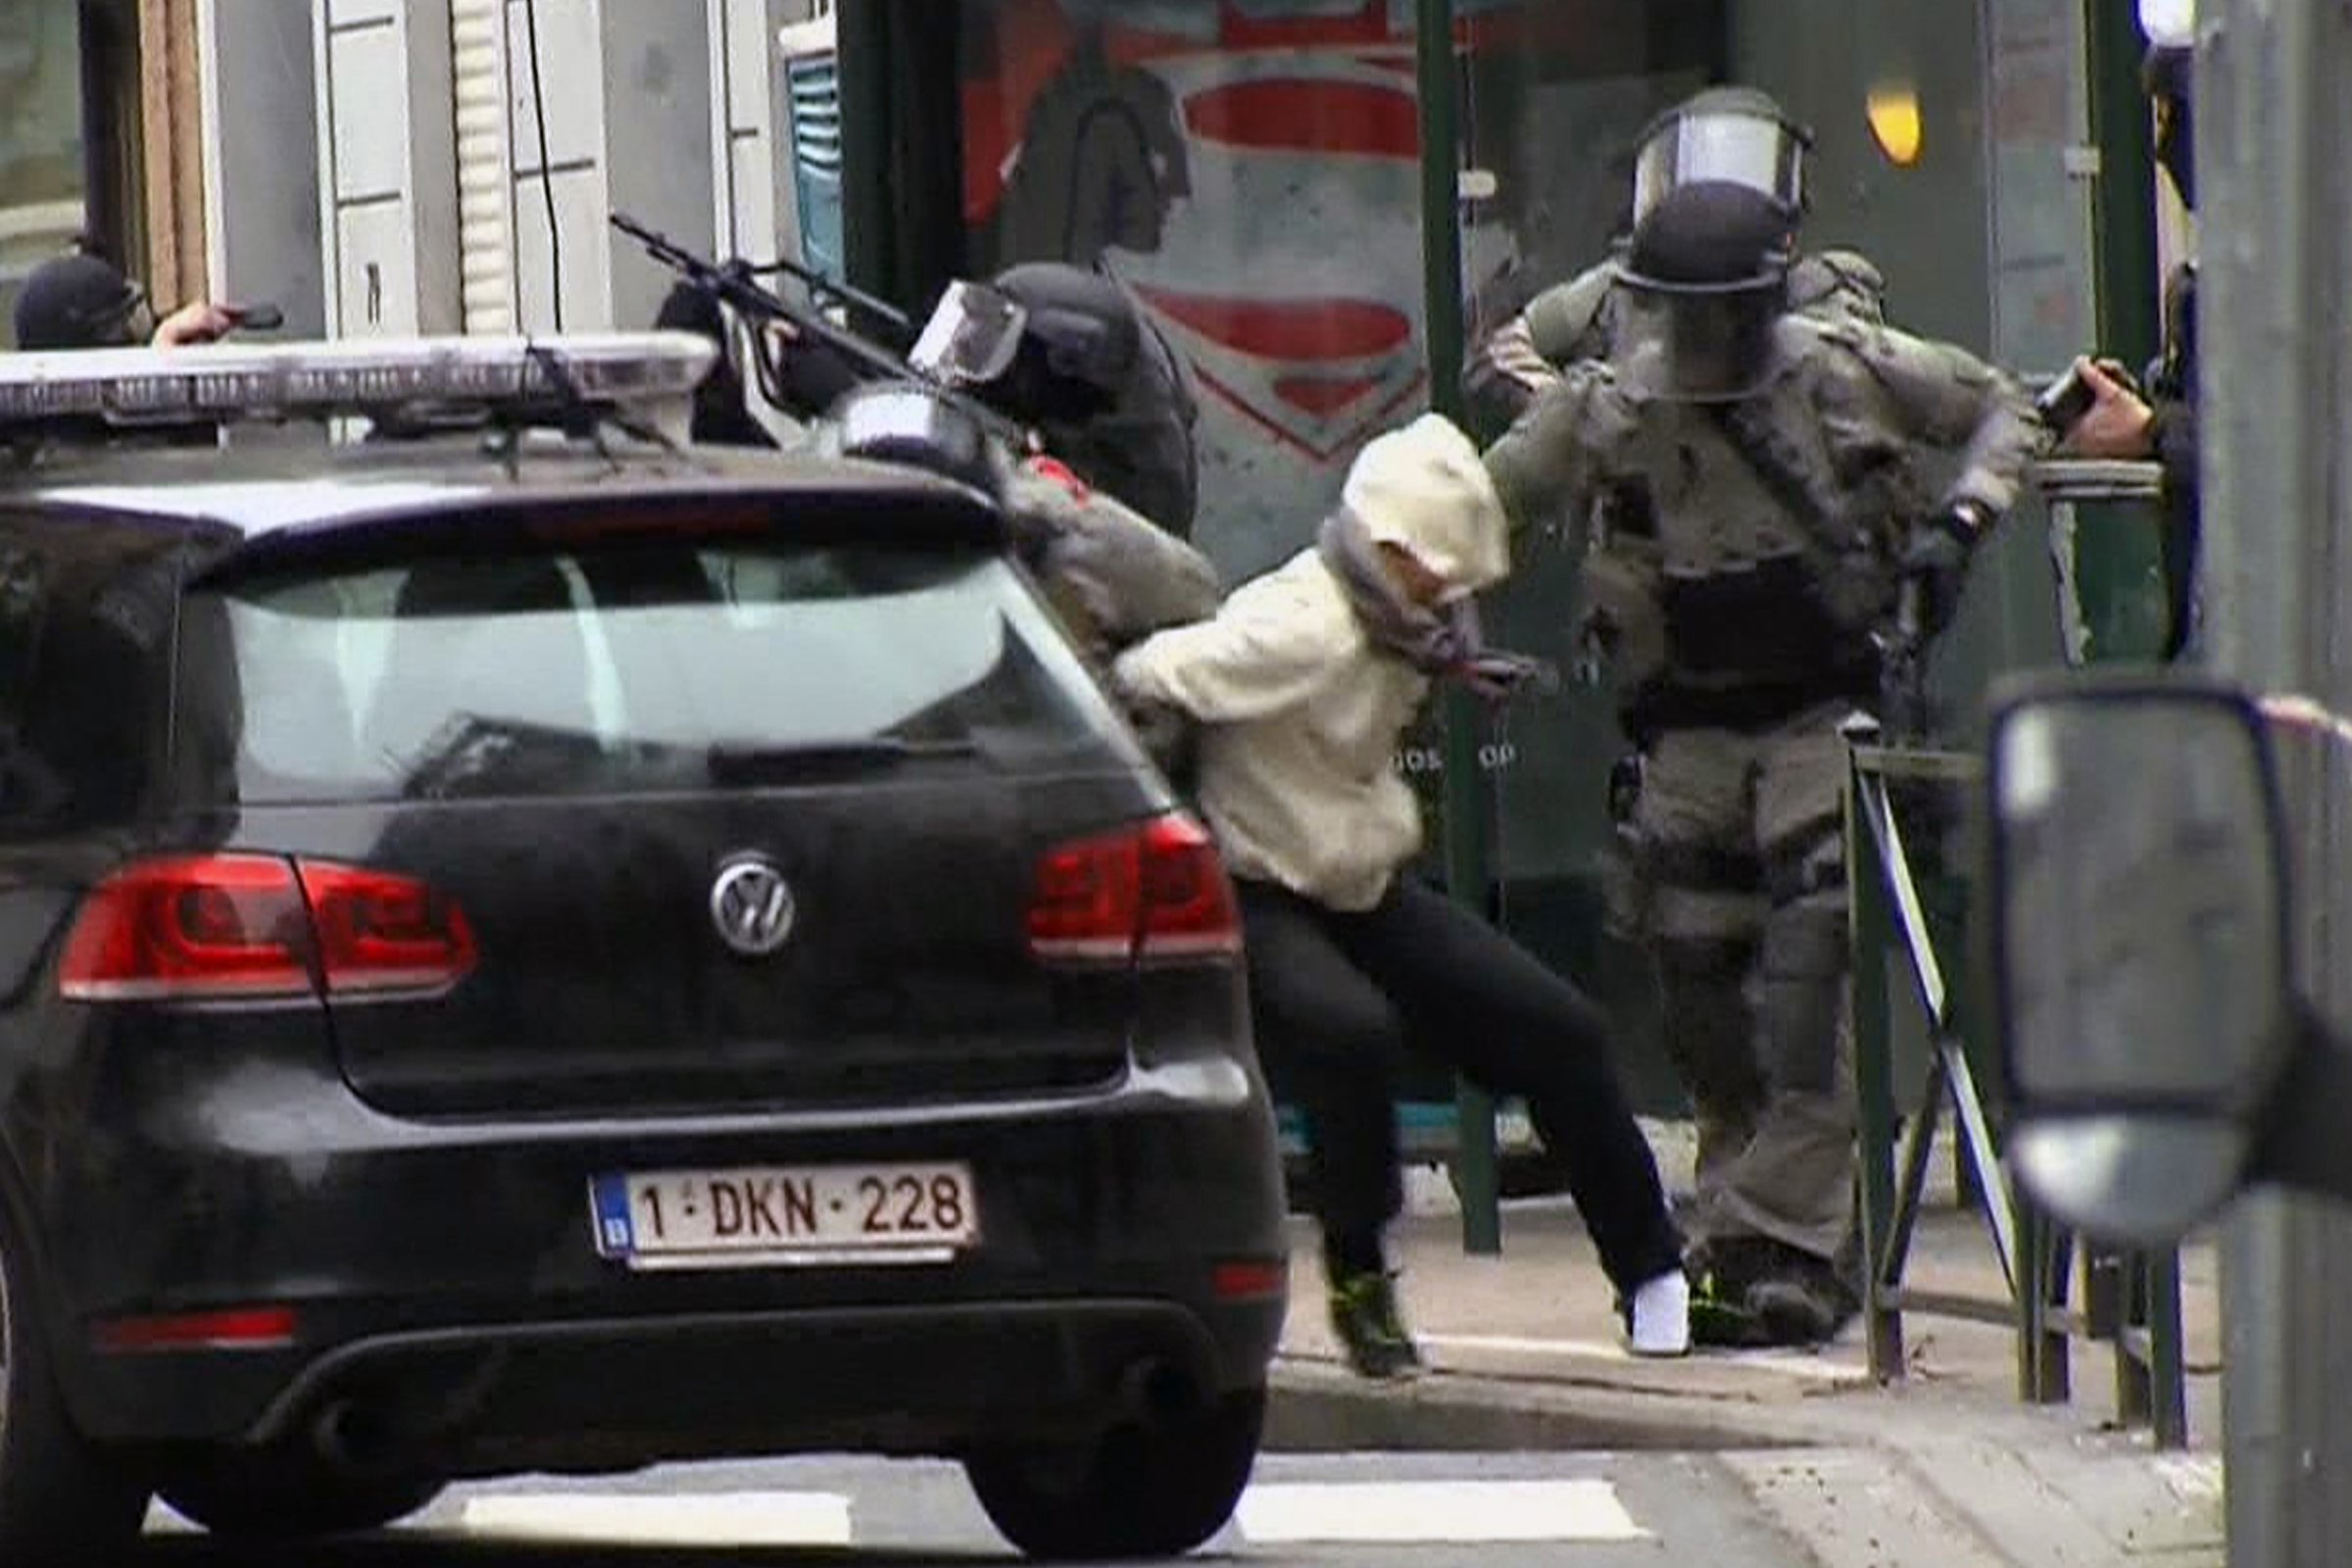 In this framegrab taken from VTM, something appears to drop from inside the pant leg of Salah Abdeslam as he is arrested by police during a raid in the Molenbeek neighborhood of Brussels, Belgium, March 18, 2016.